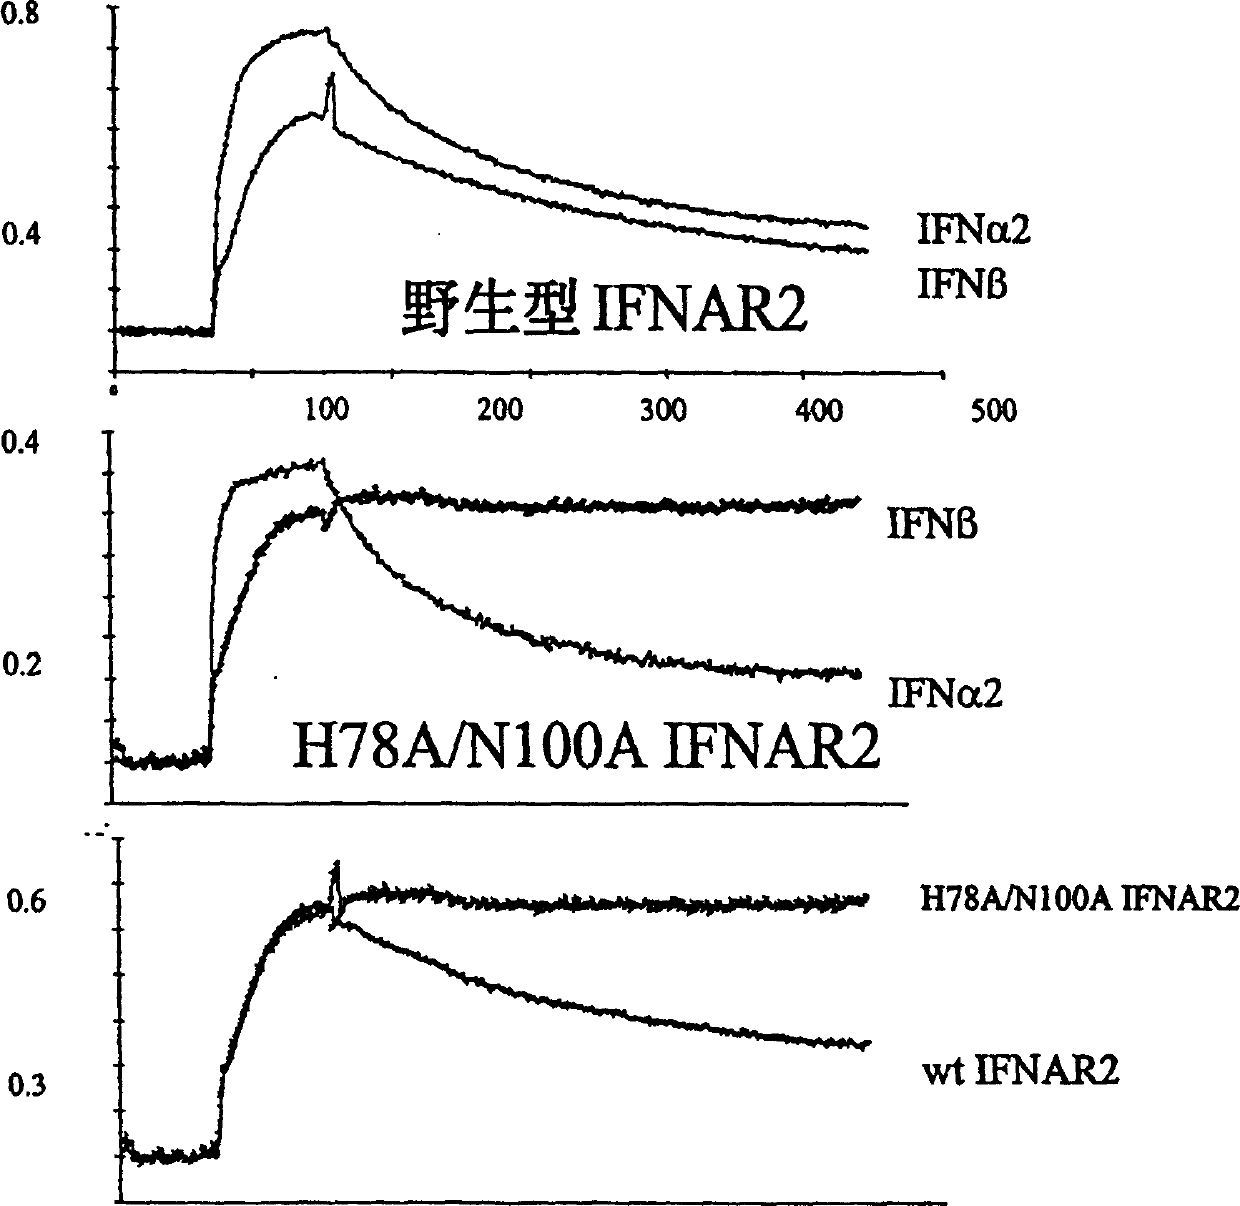 IFNAR2 mutants, their production and use